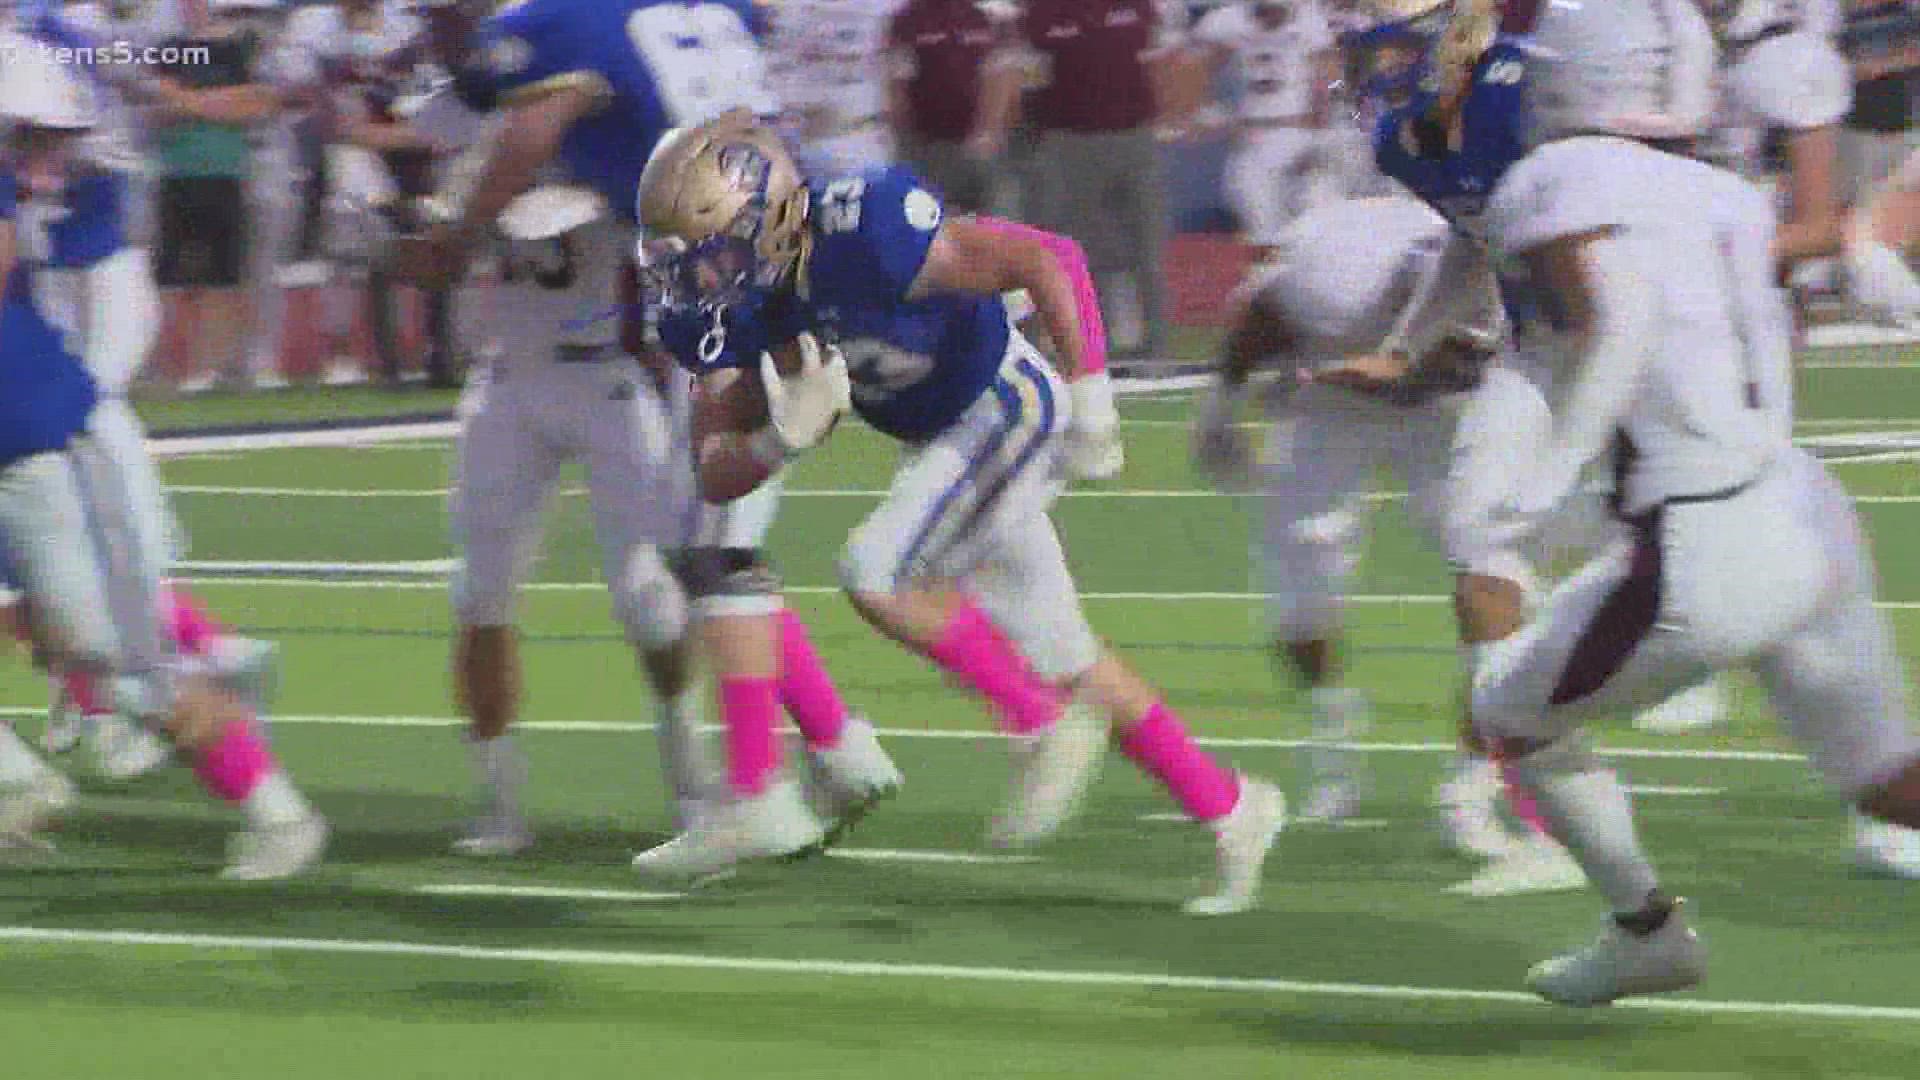 Seguin, Harlan and Alamo Heights all collected huge wins in Week 7 on the gridiron.